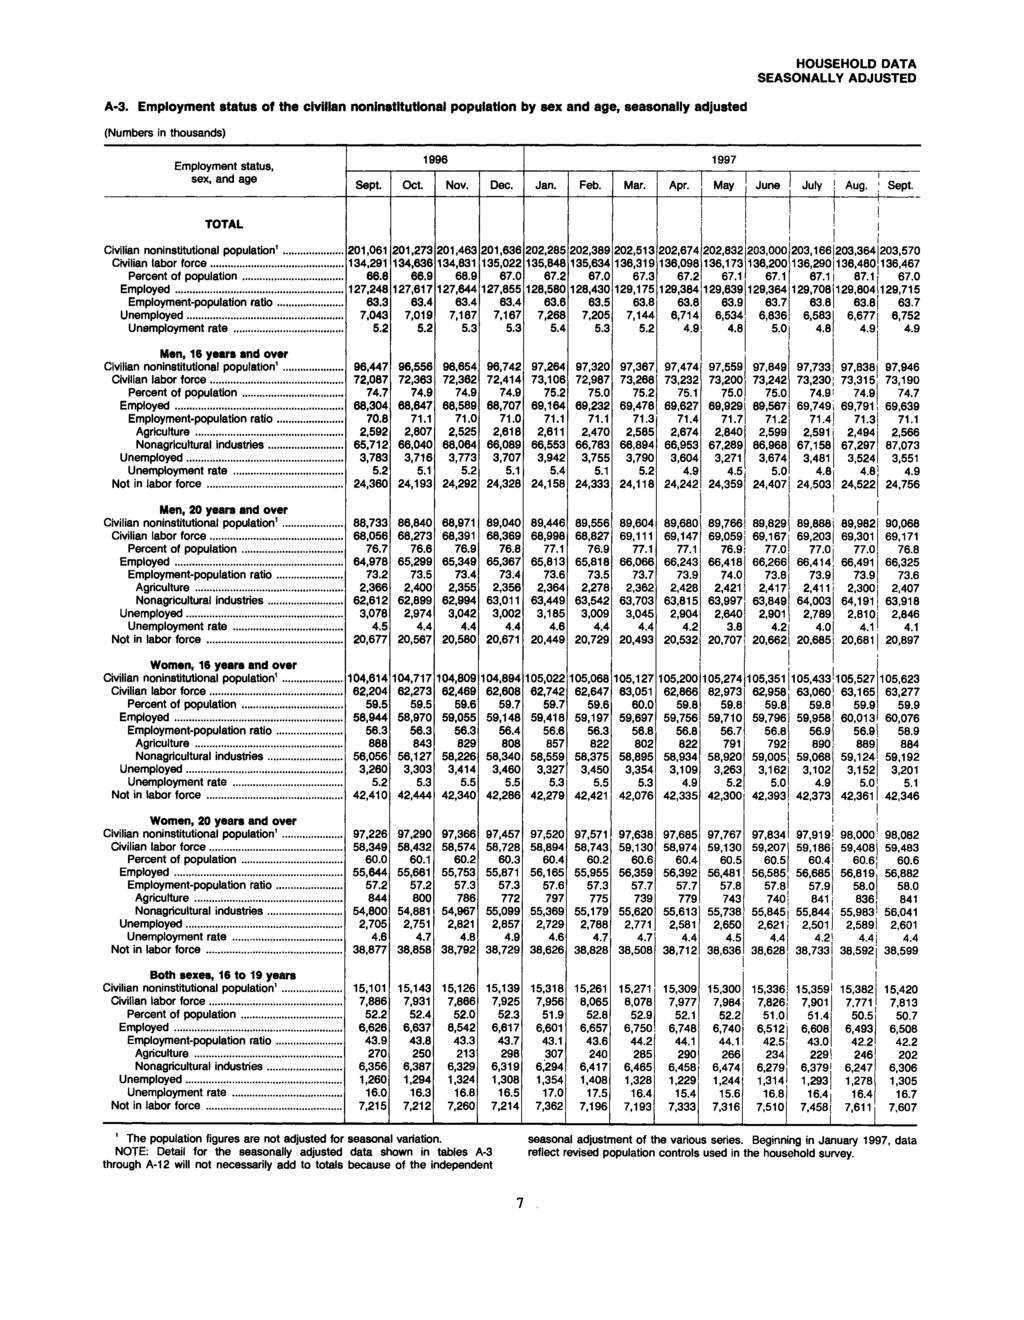 A-3. Employment status of the civilian noninstitutional population by sex and age, seasonally adjusted (Numbers In thousands) Employment status, sex, and age TOTAL 997 Oct. Nov. Dec. Jan. Feb. Mar.